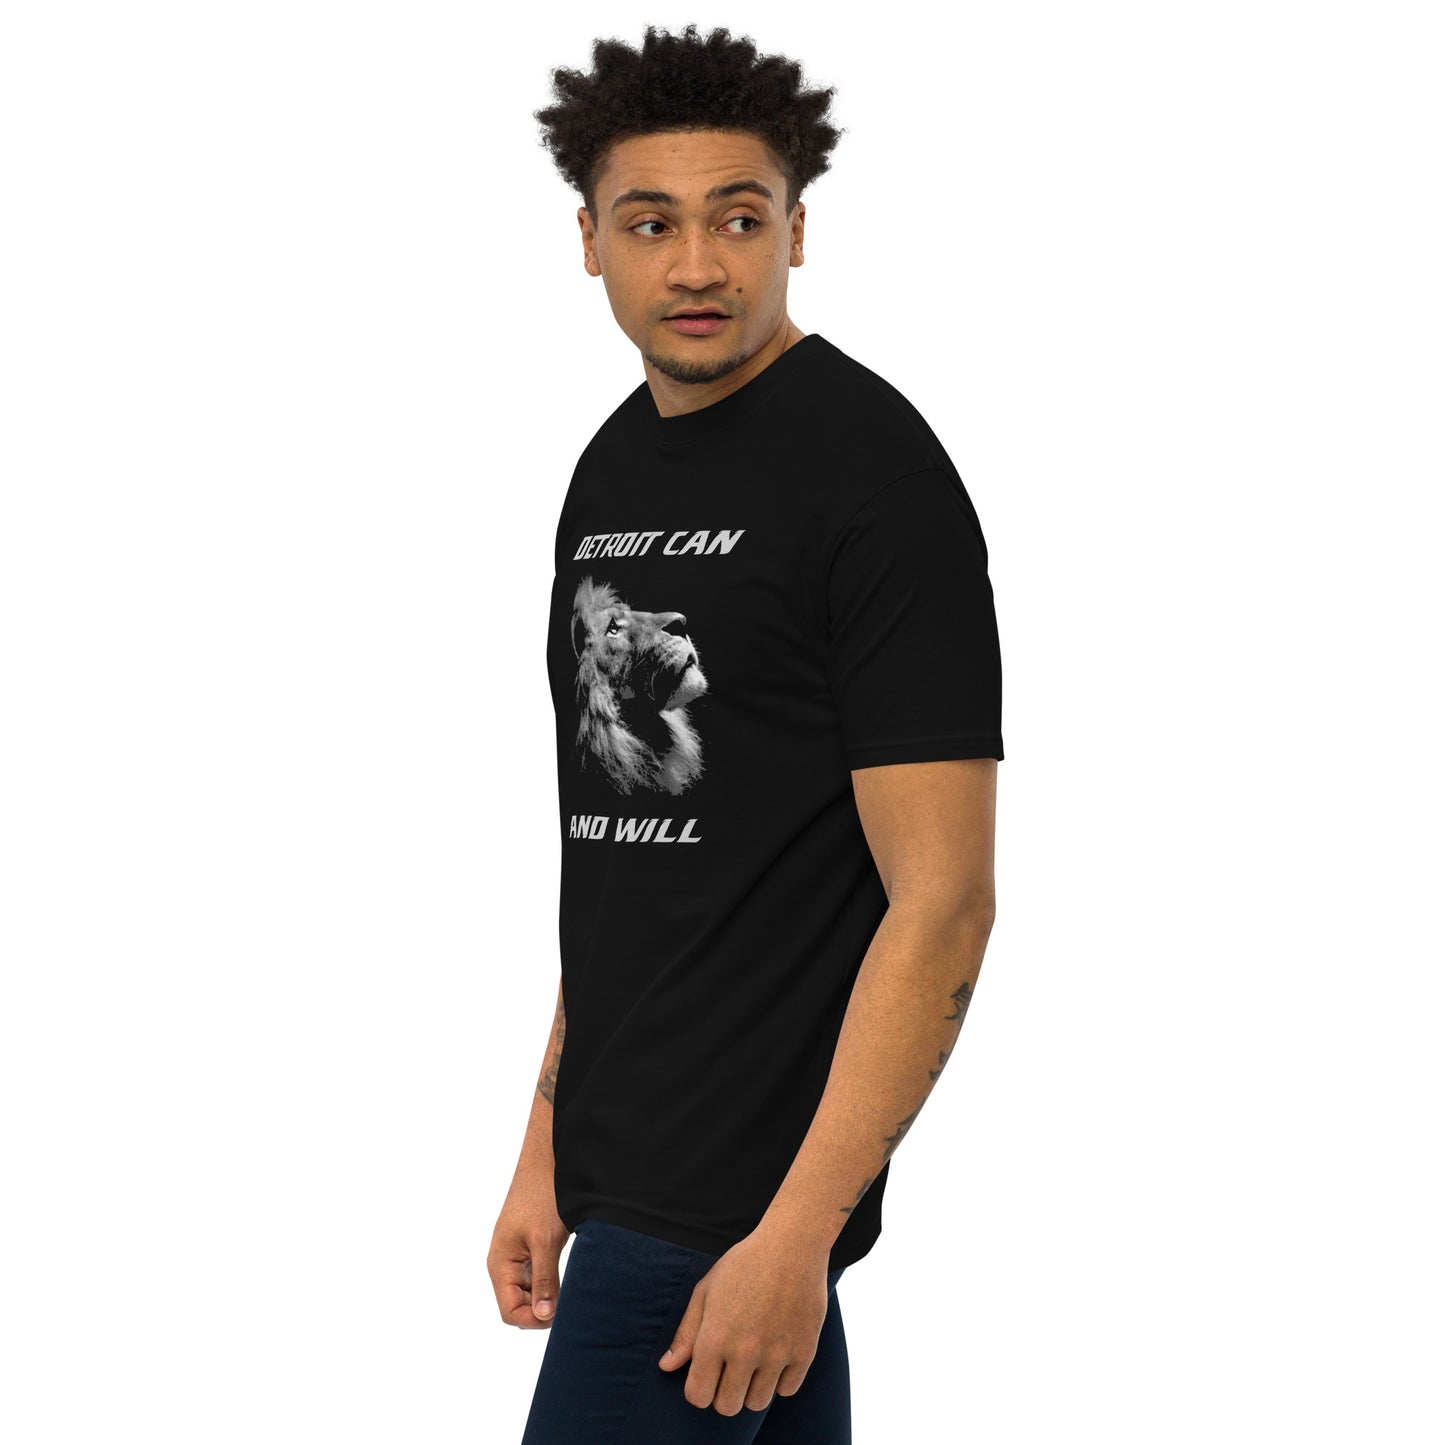 DETROIT CAN, AND WILL - Men’s premium heavyweight tee